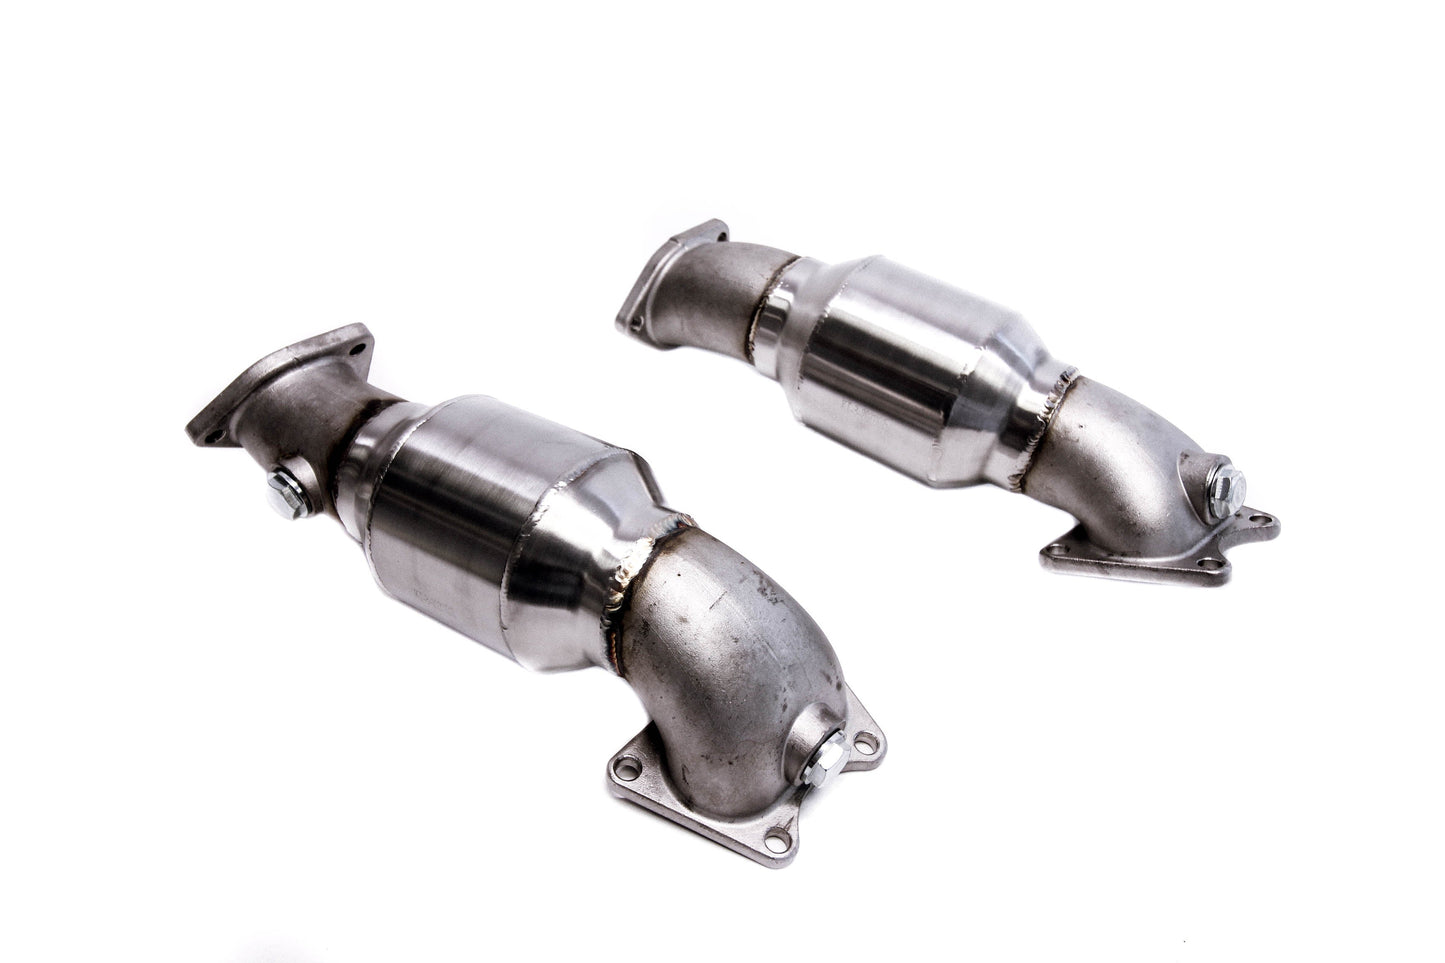 PLM - Performance Primary Catalytic Converters For Acura TL 2004 - 2008